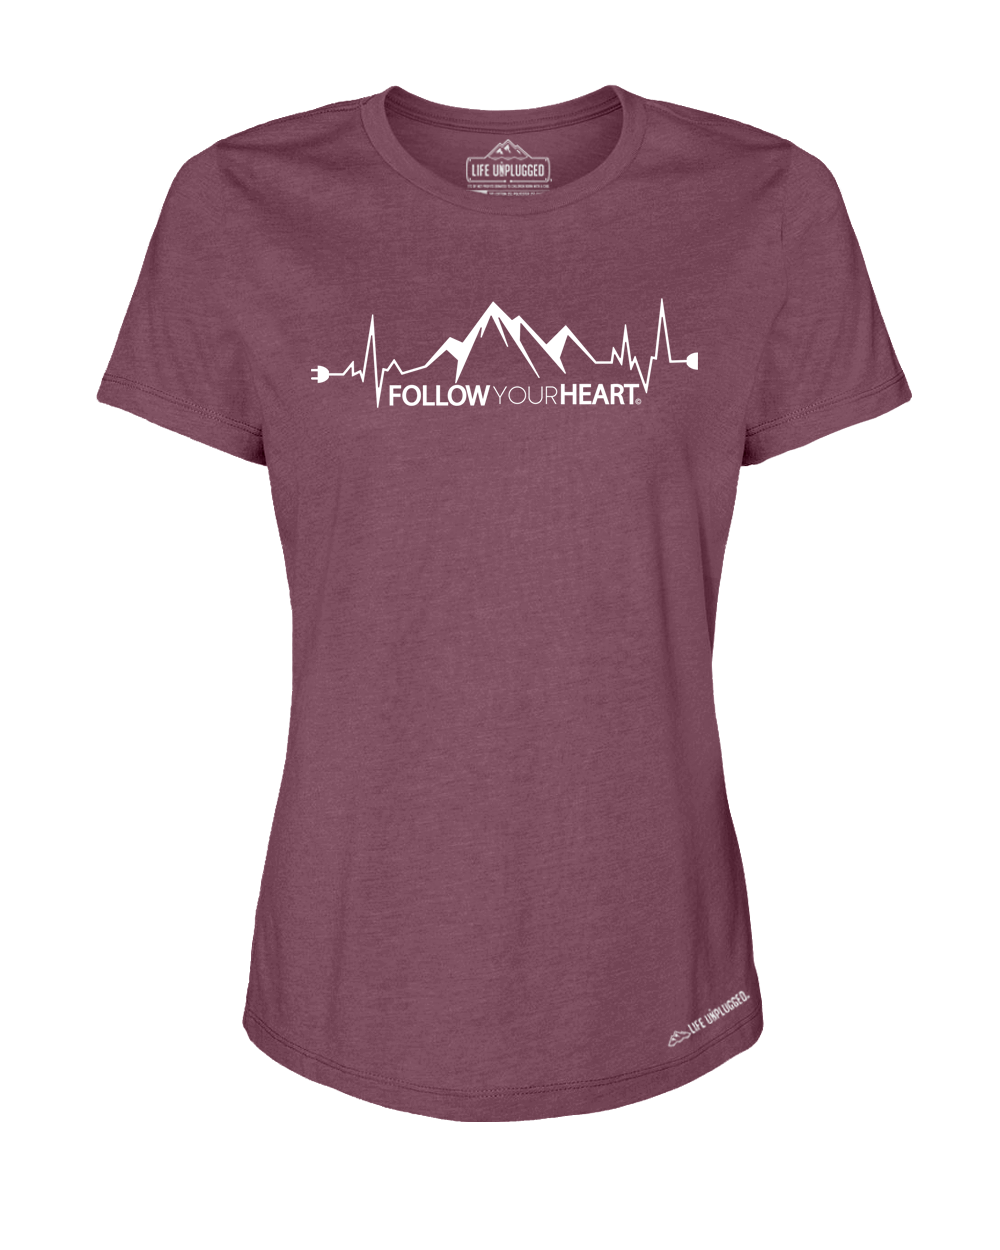 Follow your Heart Premium Women's Relaxed Fit Polyblend T-Shirt - Life Unplugged